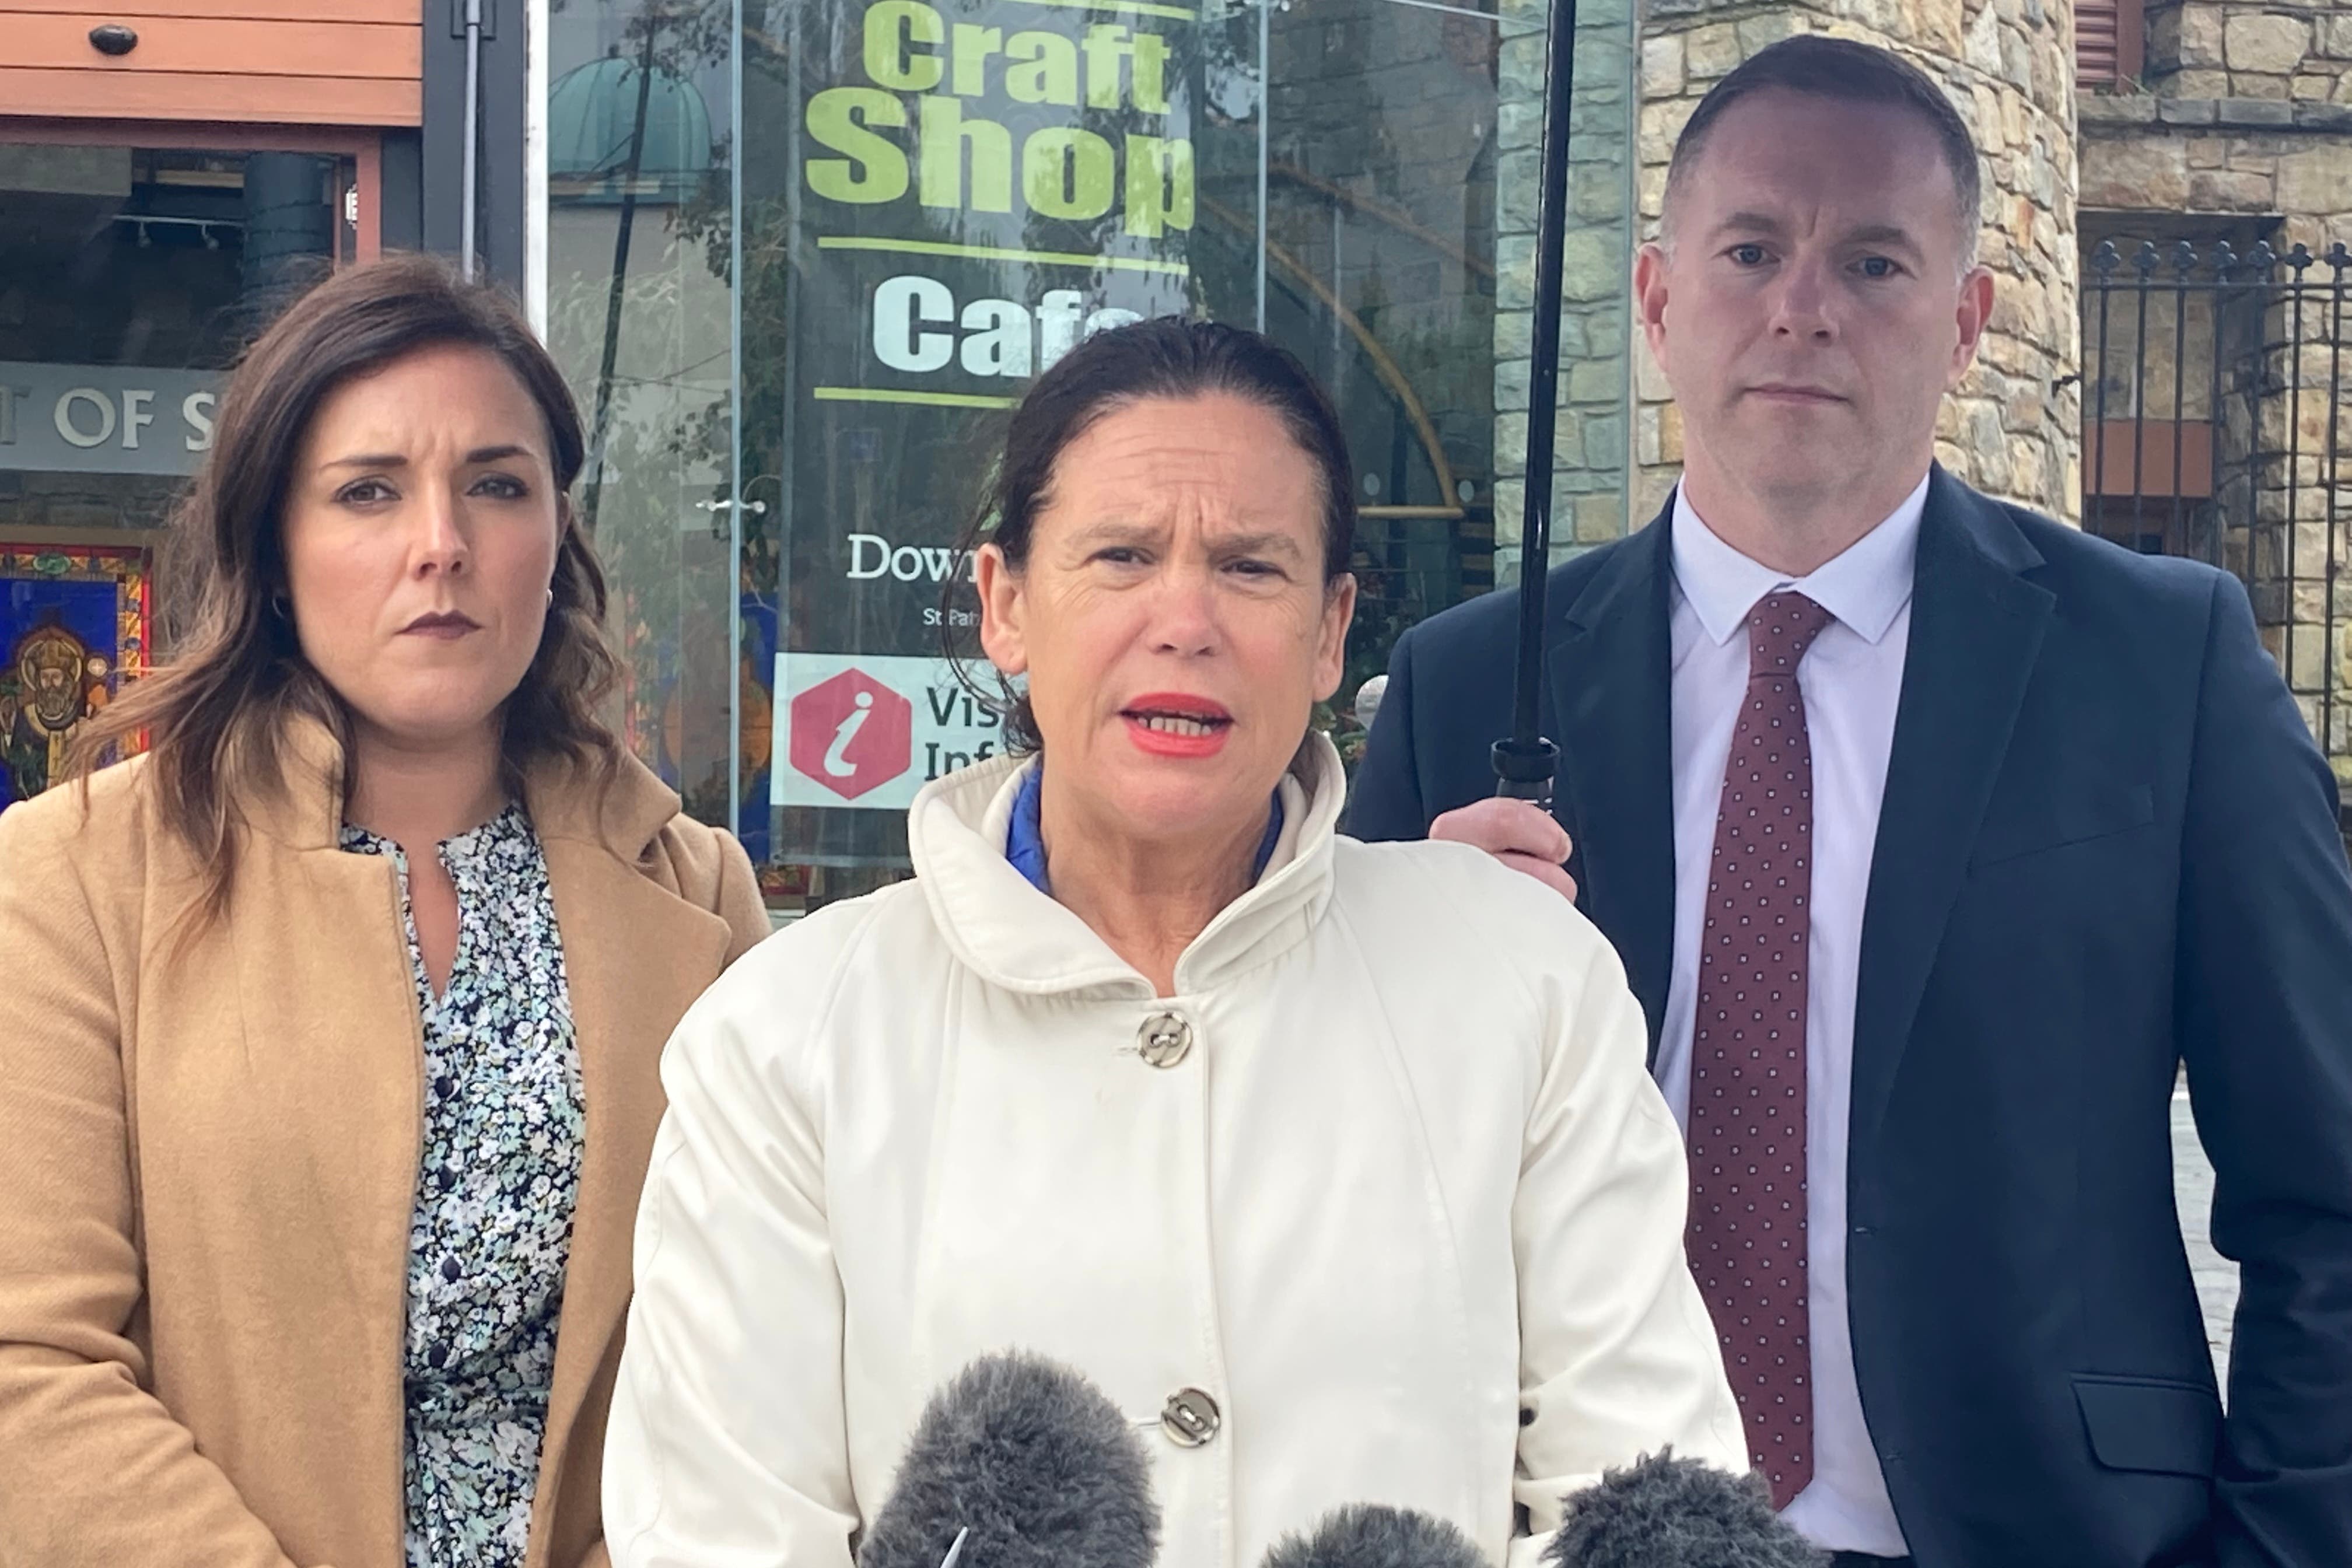 (left to right) Sinn Fein South Down MLA Cathy Mason, Sinn Fein president Mary-Lou McDonald and South Down MP Chris Hazzard speak to the media in Downpatrick on Friday afternoon (Rebecca Black/PA)